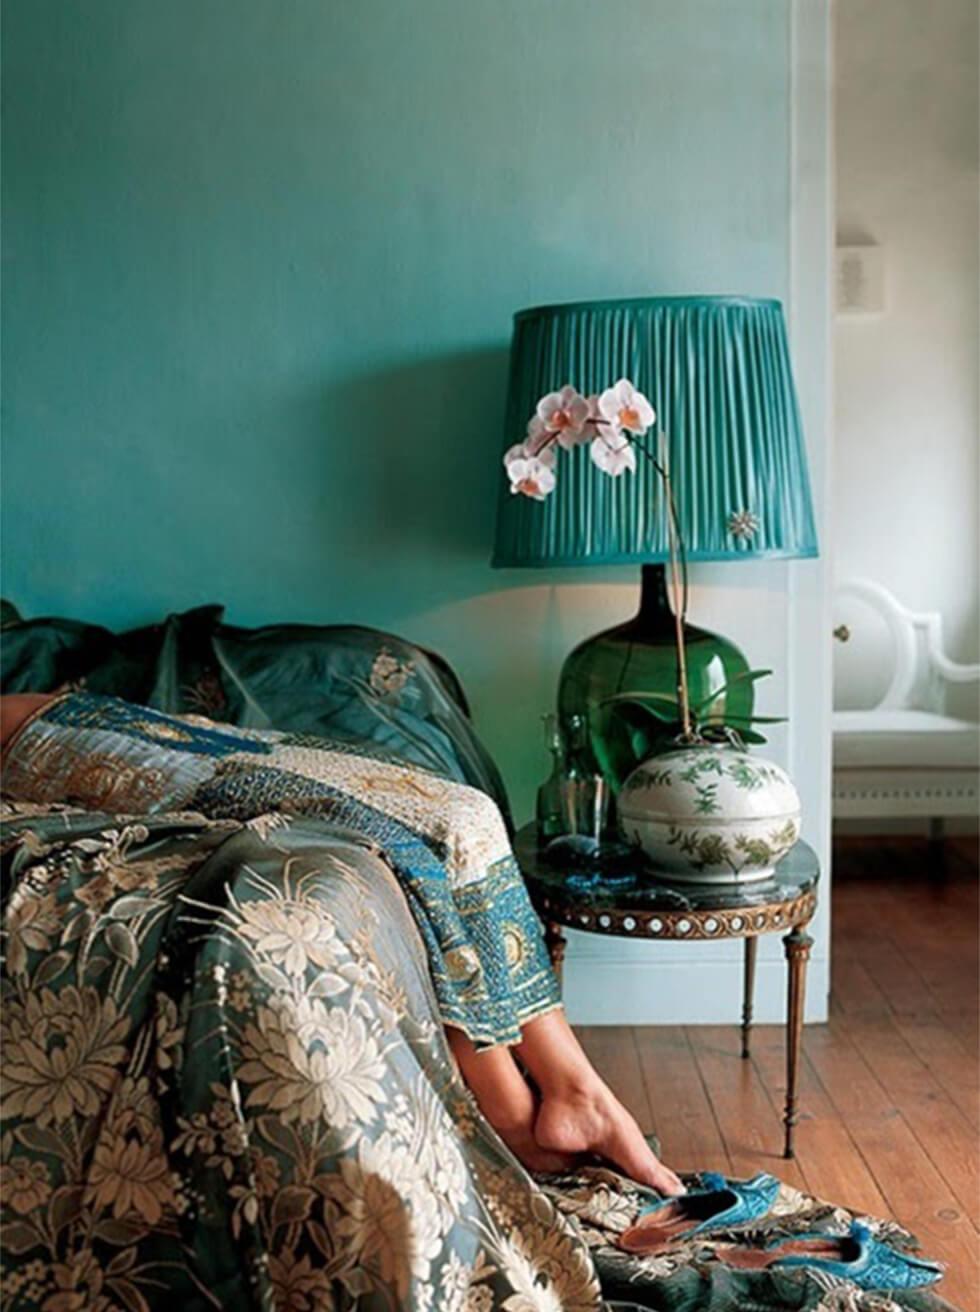 Bohemian bedroom with varying shades of teal on prints, bedding and accessories.